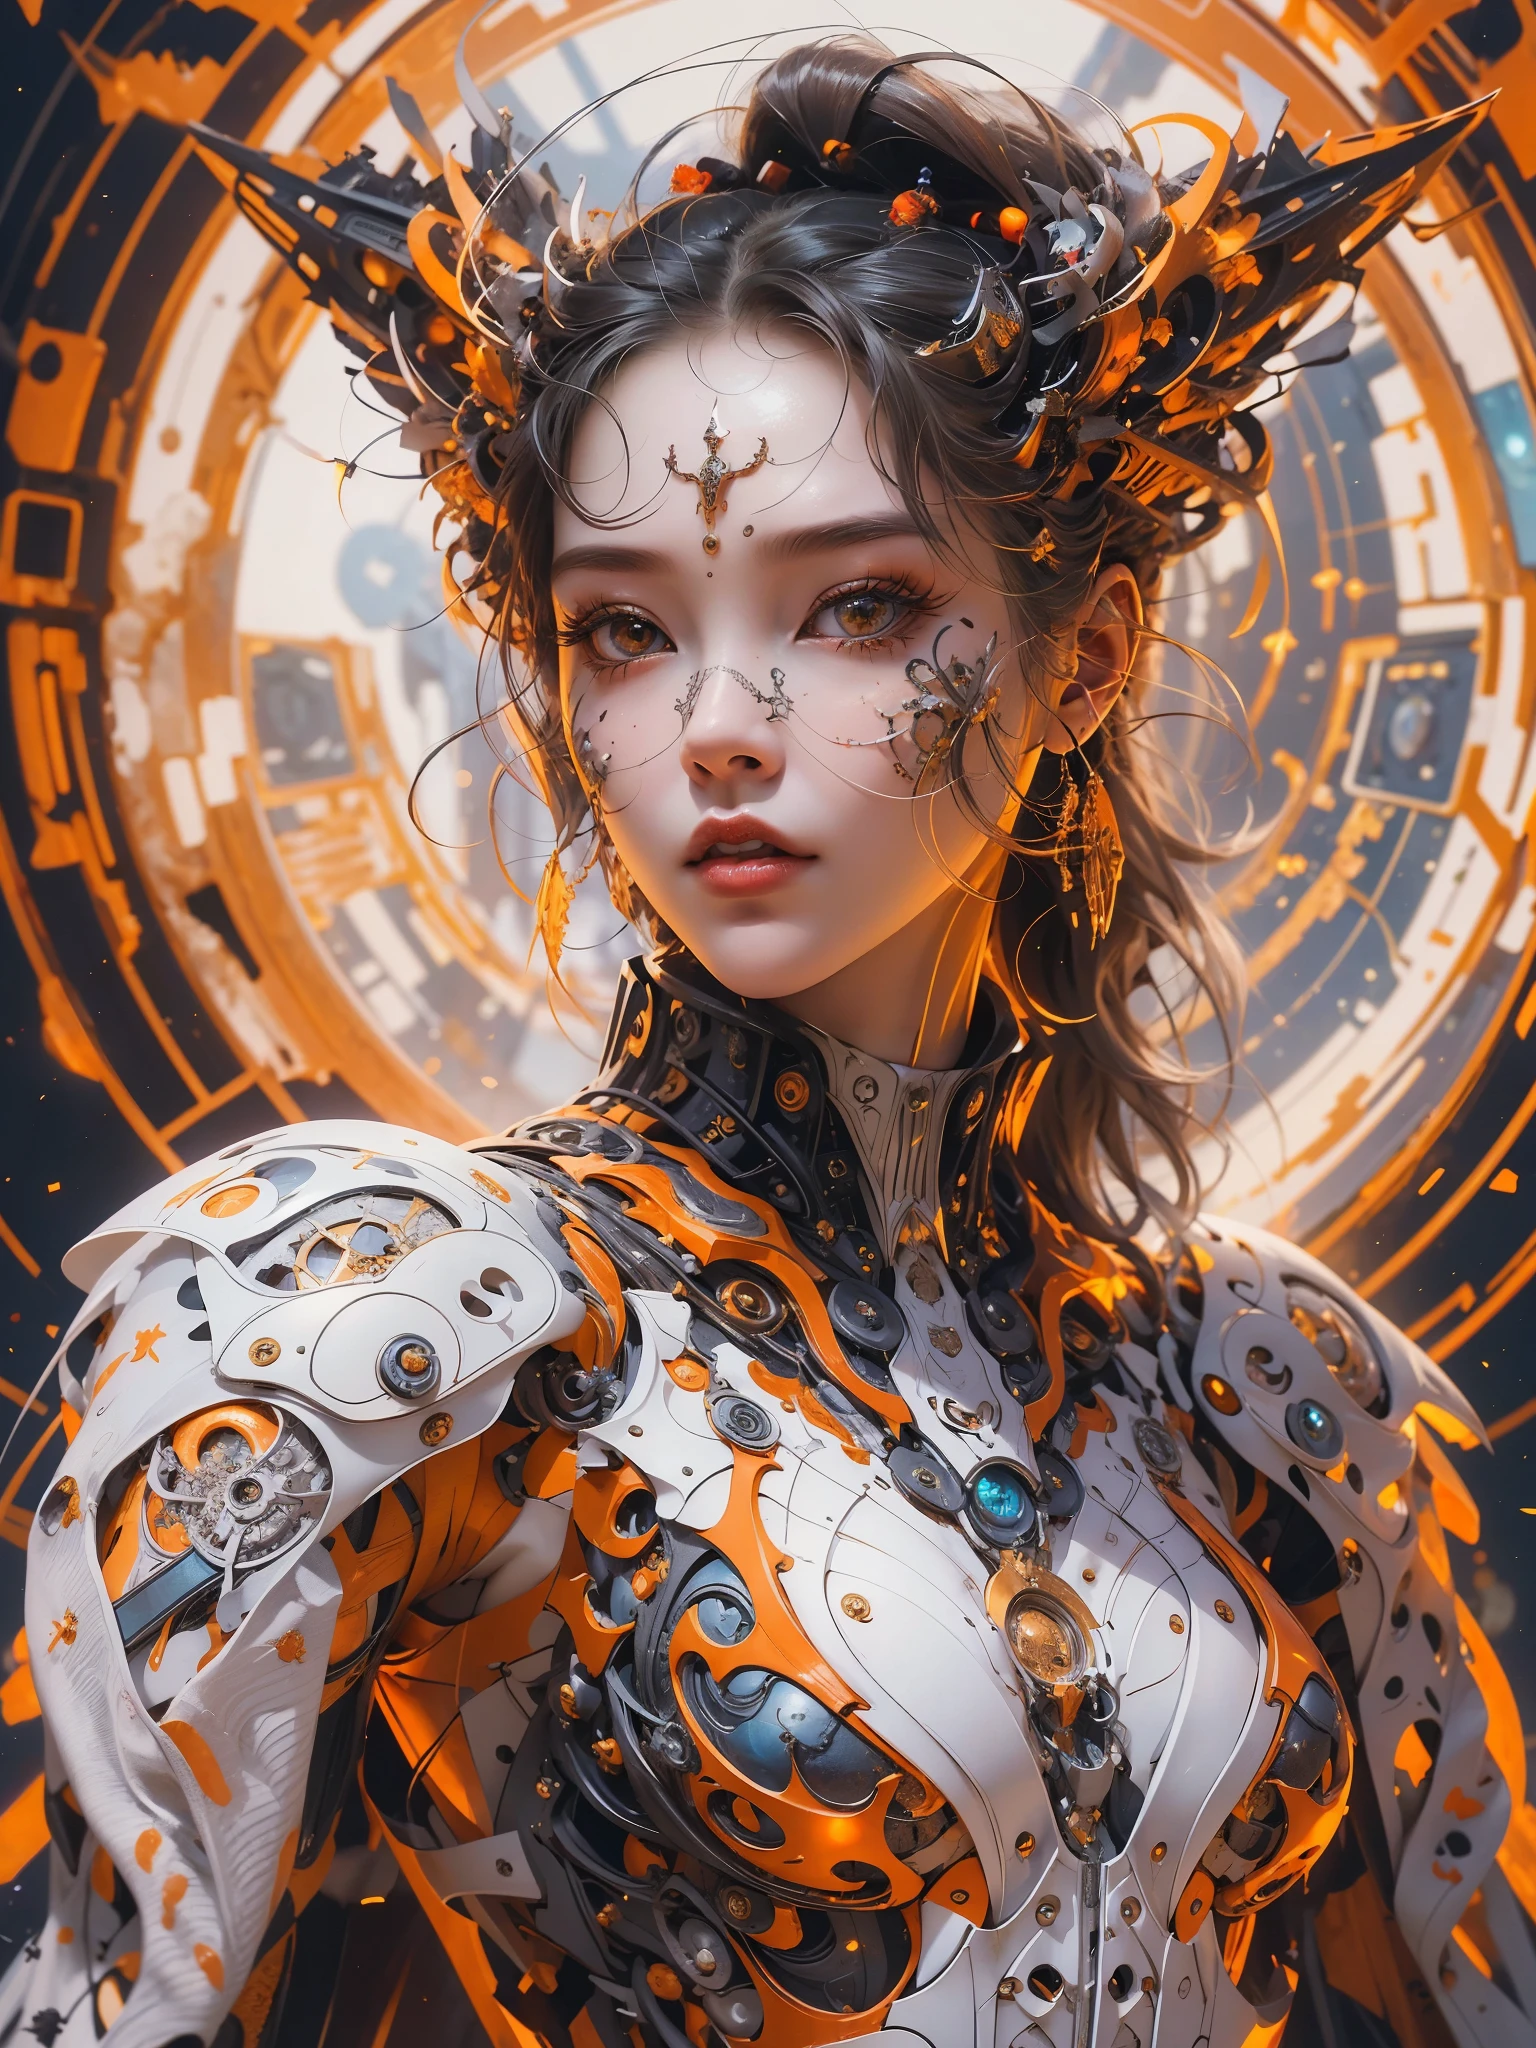 Craft a portrait of a futuristic girl warior, depicted in ultra-high resolution with a balance of light and shadow to create an impressive visual depth. The artwork should be gallery-quality, on par with masterpieces by renowned artists.
Cyberpunk warrior, red white and orange is dominant color.
The girl warior is the epitome of Kimono style, with eyes that are central to the composition. Their cosmic, space-like qualities with uniquely colored sclera and youth style, fractal designs suggest advanced technology or a futuristic leap in evolution. The intense and focused gaze should command immediate attention.

The girl face features subtle facial markings or tattoos that tell a story of bravery and valor. The tattoo showcases a cleavage design that blends futuristic aesthetics and functionality.

Include a detailed full-body close-up that accentuates the warrior girl futuristic nude attire, conveying readiness for an interstellar confrontation. The portrayal should be powerful and inspiring, signifying the warrior girl role as a pre-eminent warrior of future warfare